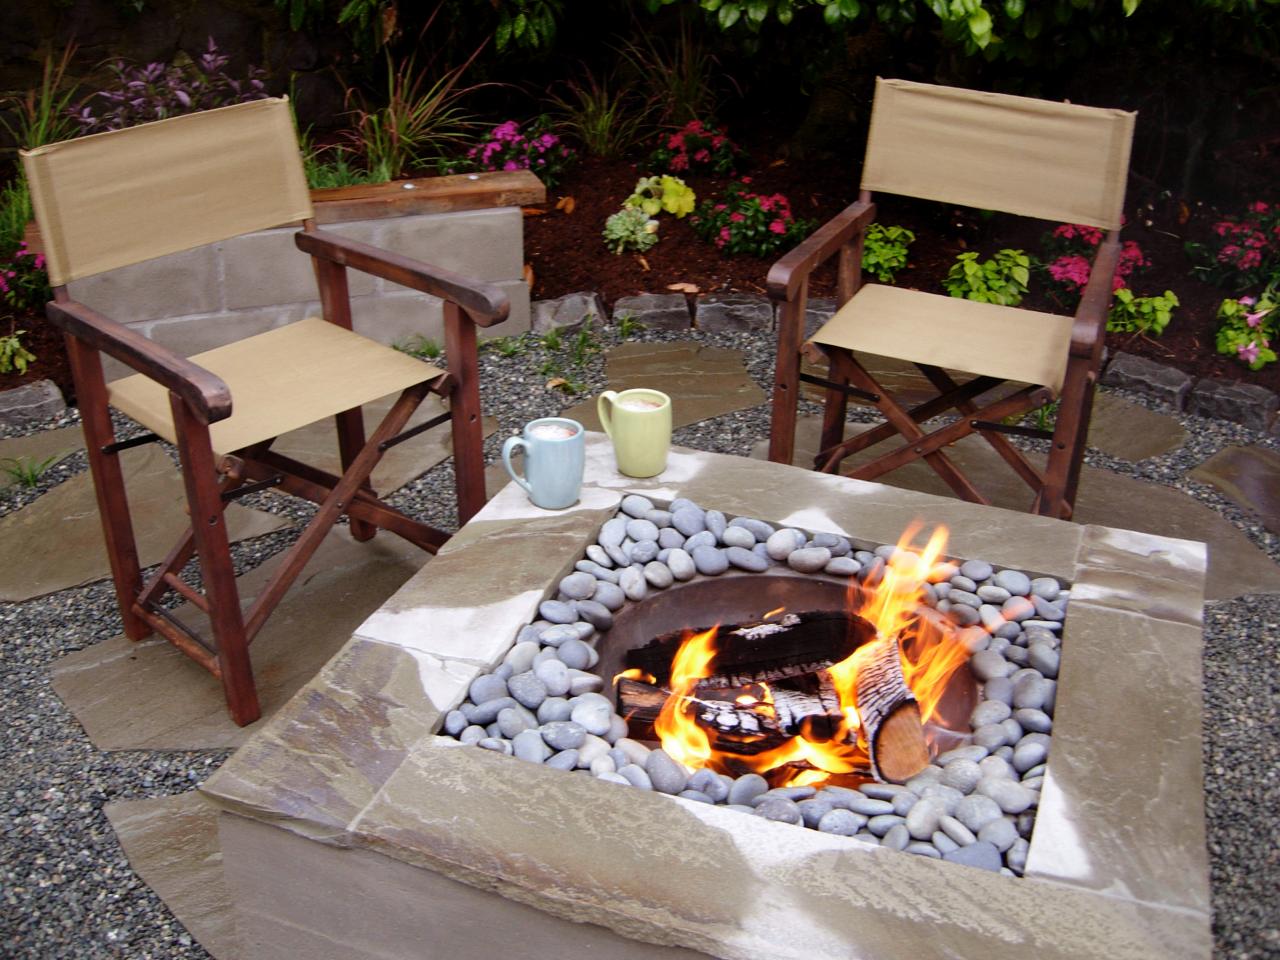 How To Make A Concrete Fire Feature, How To Make A Portable Outdoor Fire Pit